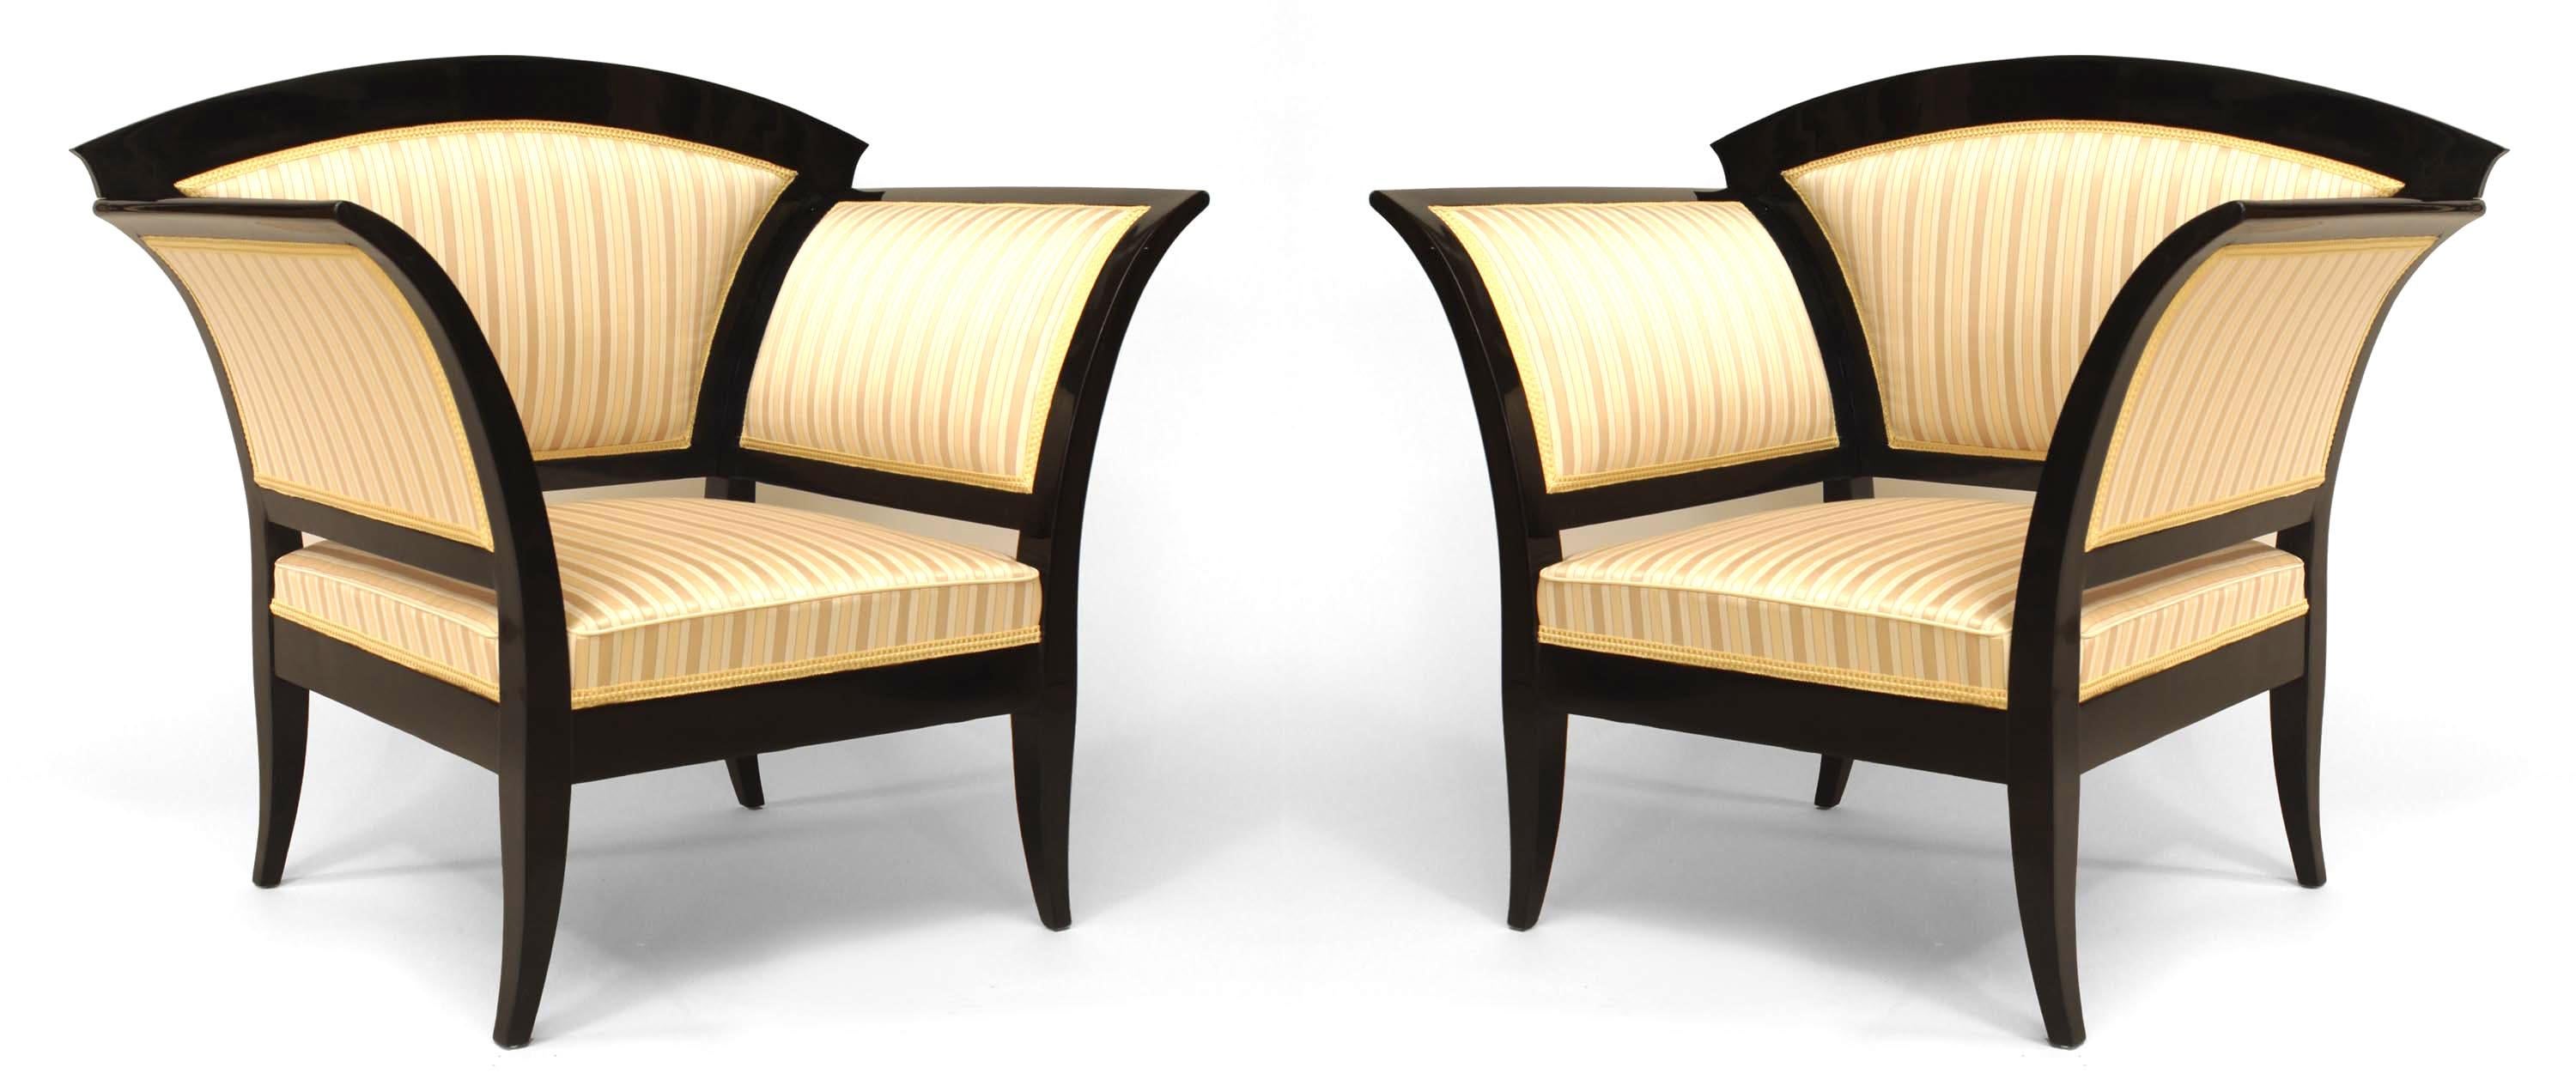 PAIR of Austrian Biedermeier ebonized cherrywood bergere chairs with flared design arms and legs with an arch form back and upholstered in a gold stripe damask (Circa 1830).
